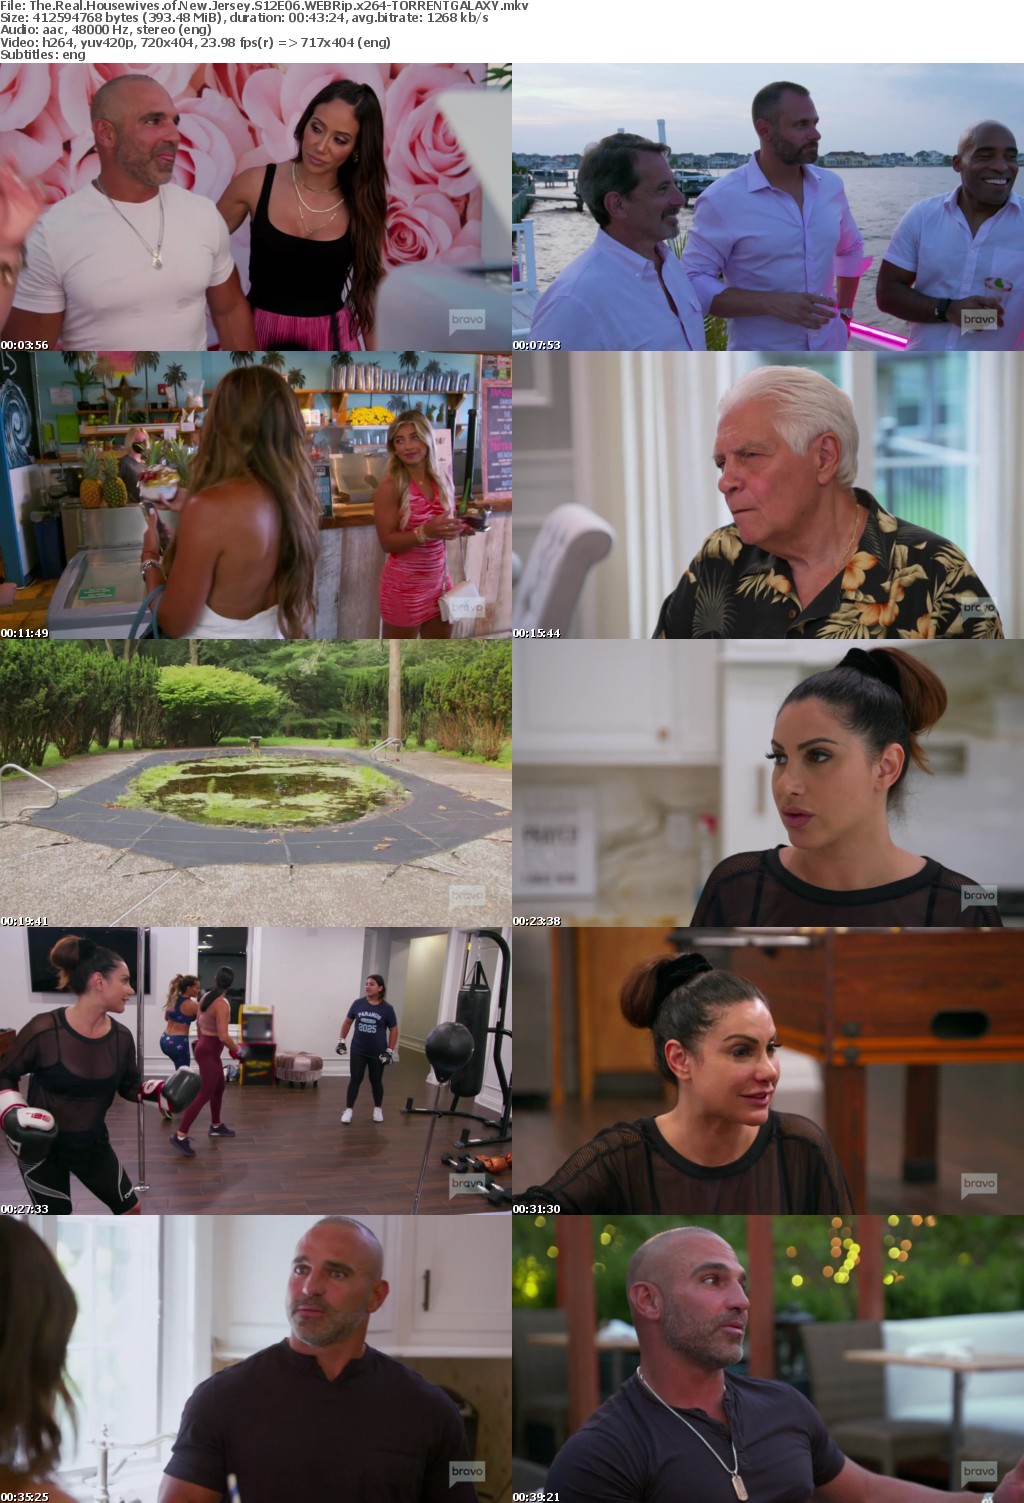 The Real Housewives of New Jersey S12E06 WEBRip x264-GALAXY